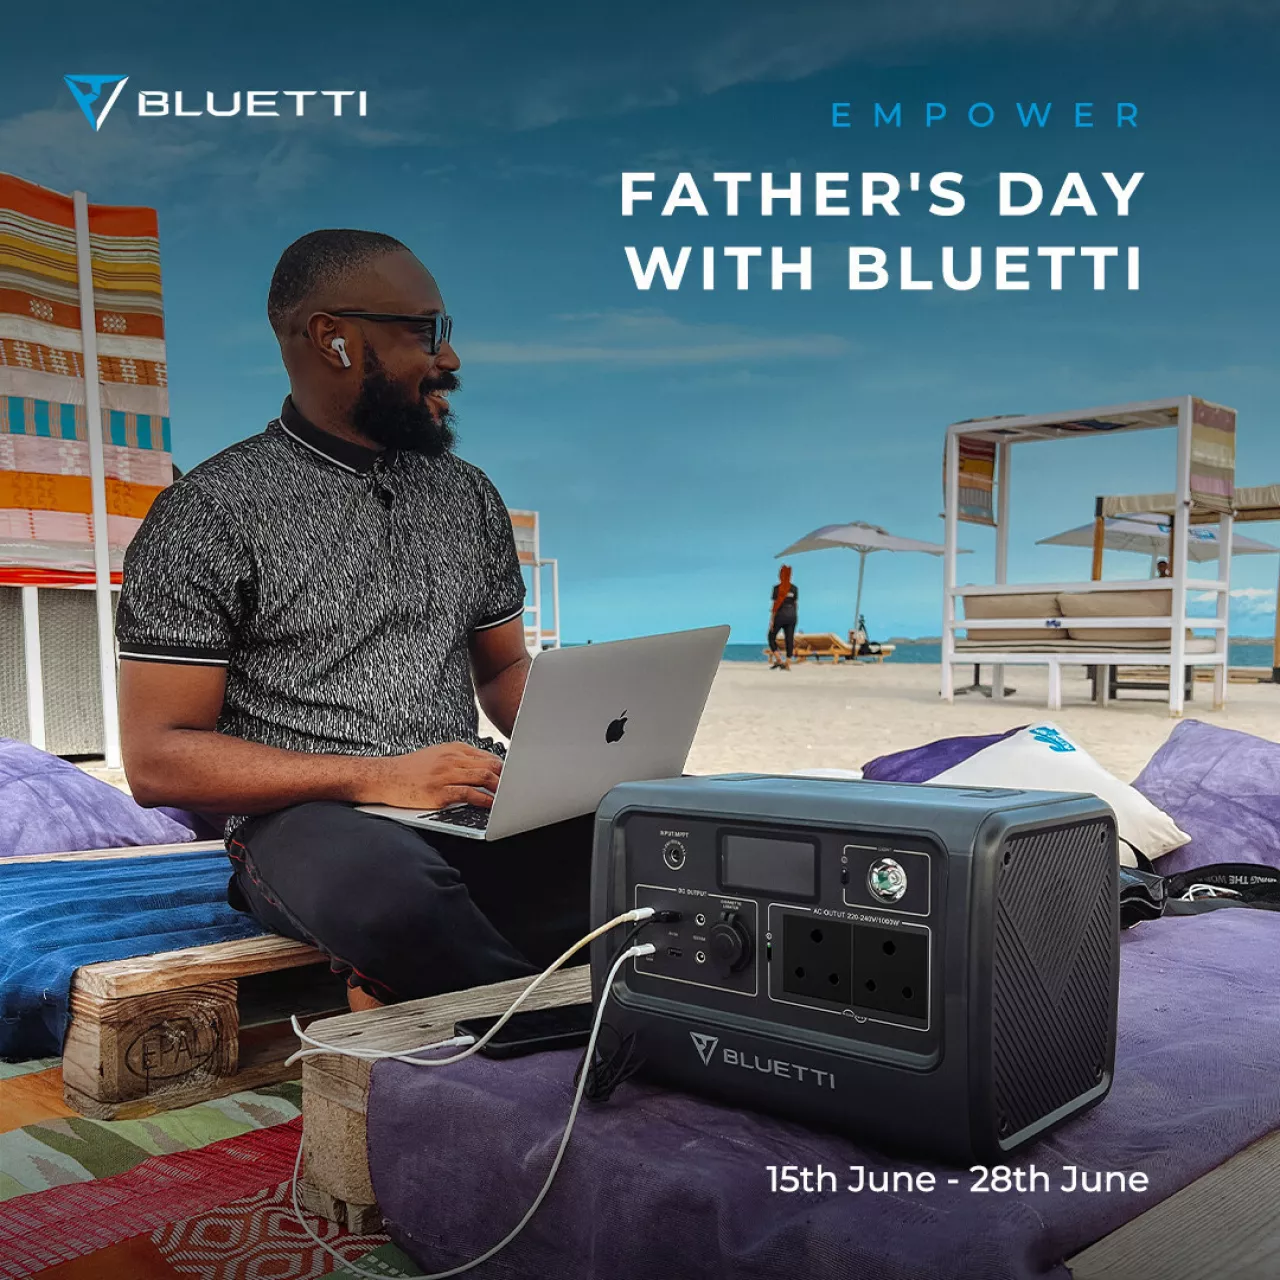 BLUETTI Presents Unbeatable Father's Day Gift Ideas to Empower Dads